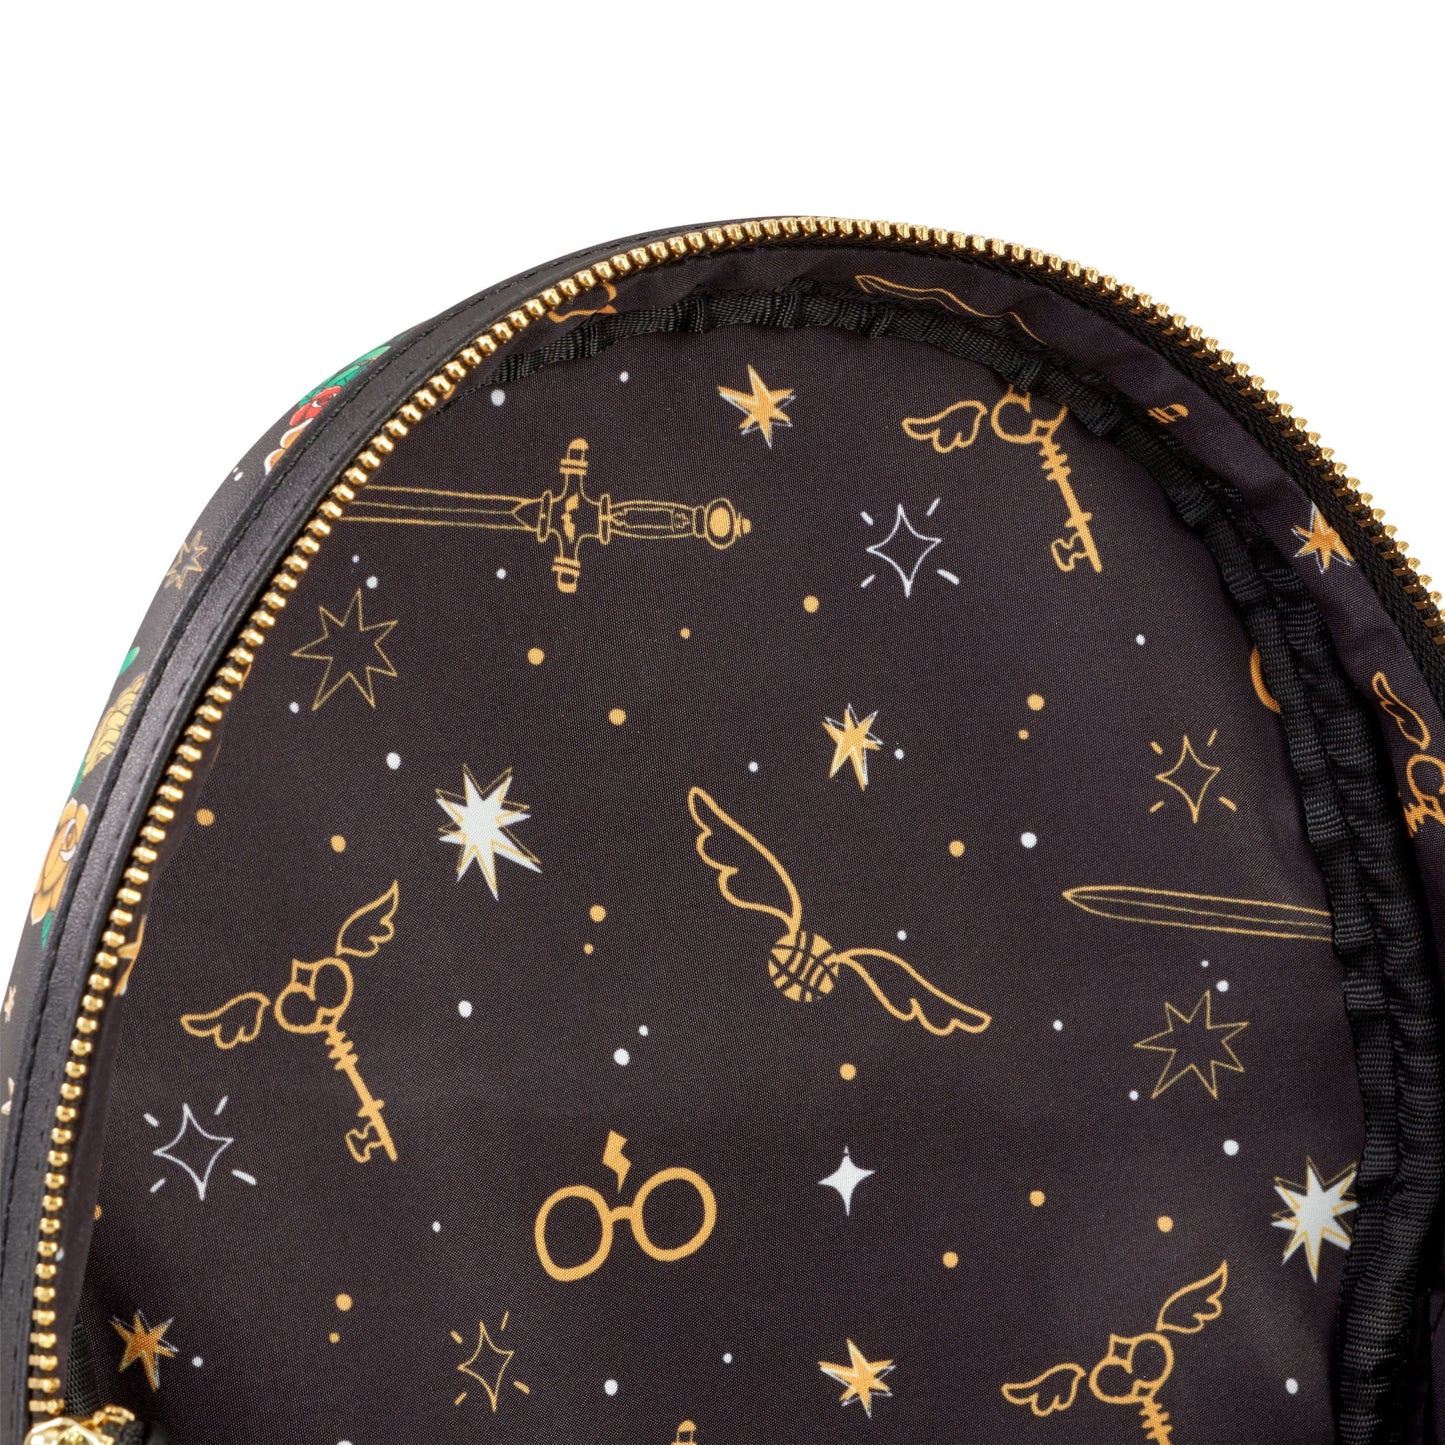 Small Harry Potter backpack - Glow in the Dark